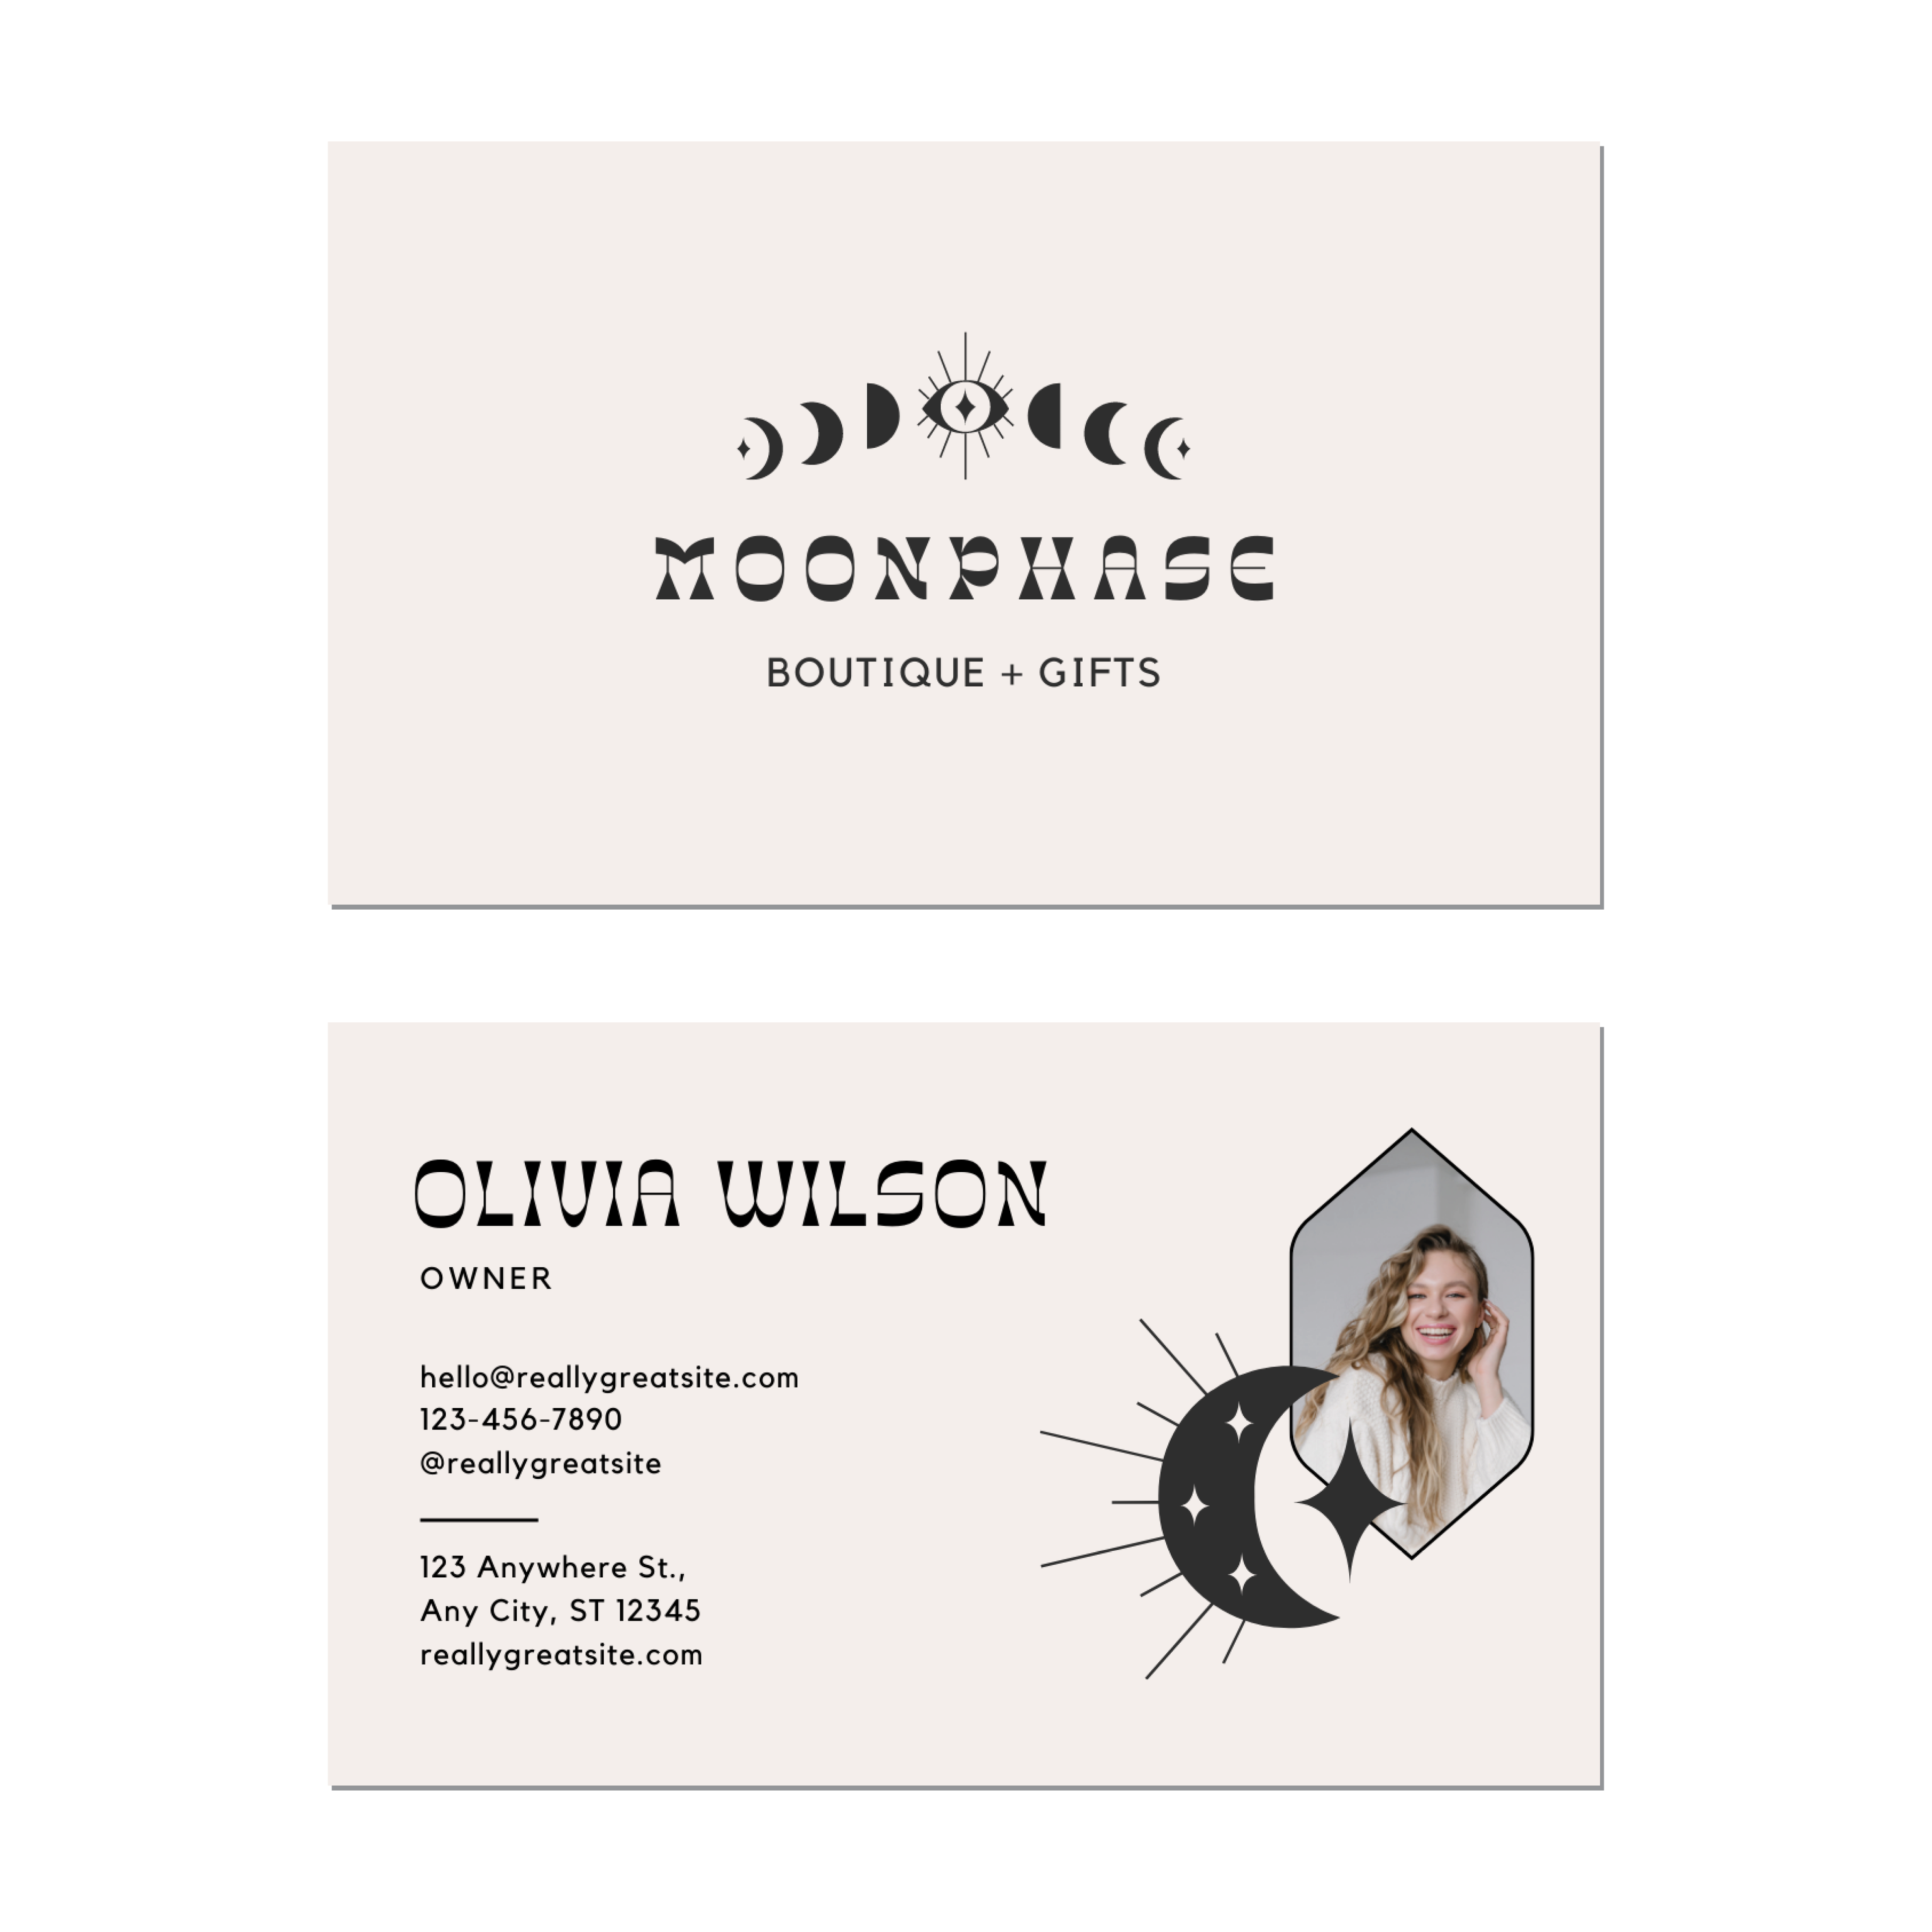 Moonphase Boutique - Business Card Template - Two Side